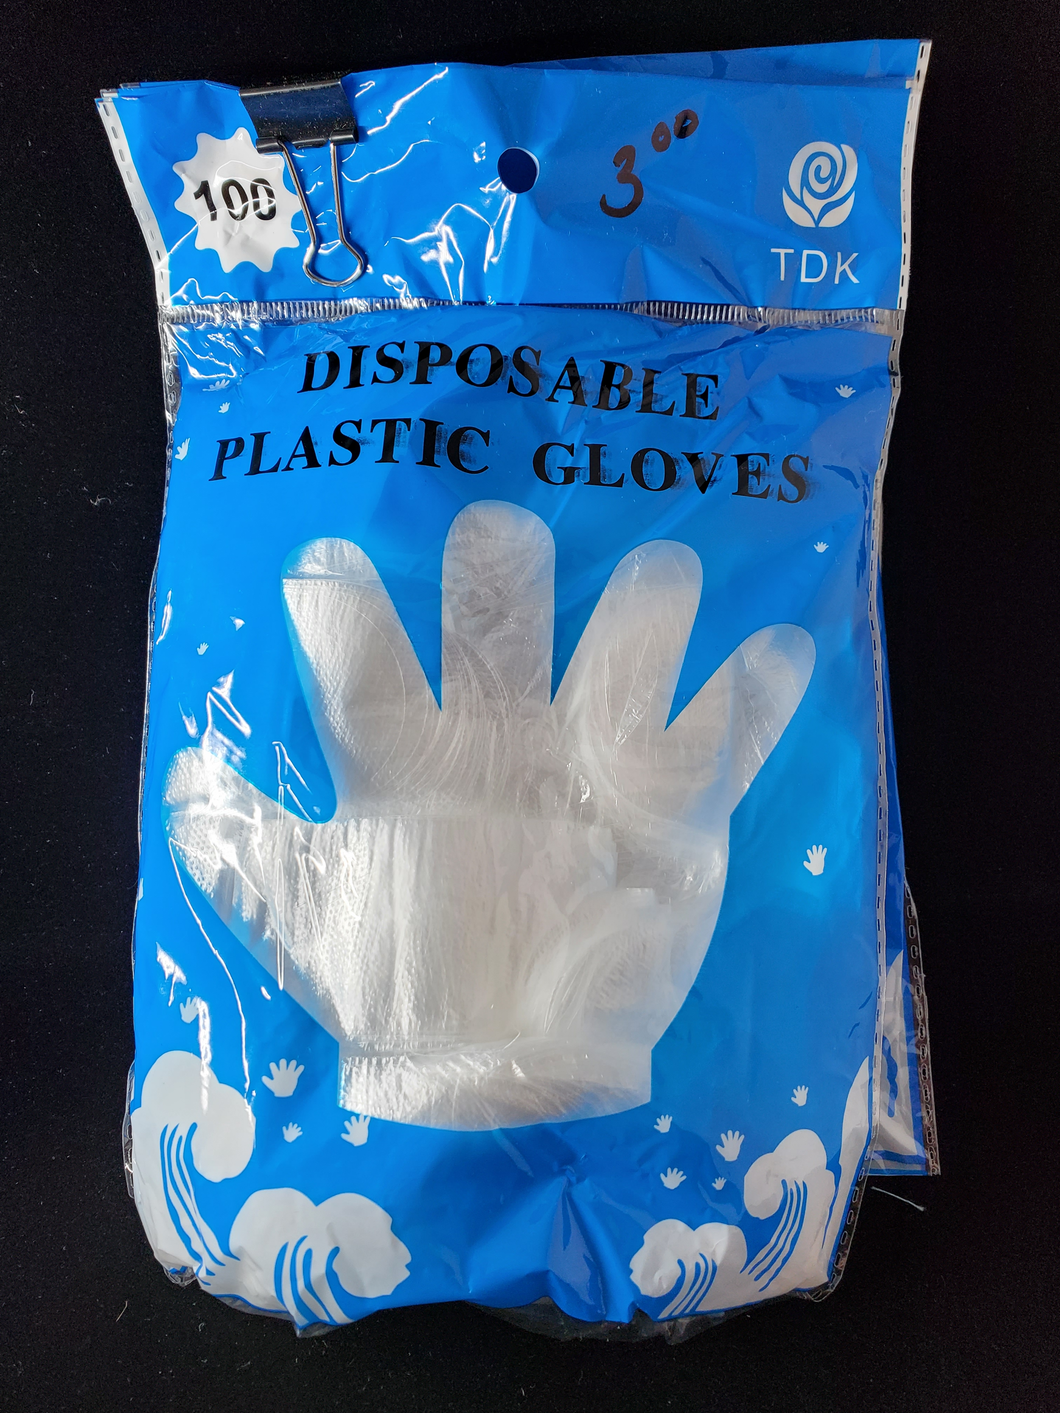 Disposable Plastic Gloves - Unique Inspirations by Tracy and Anna